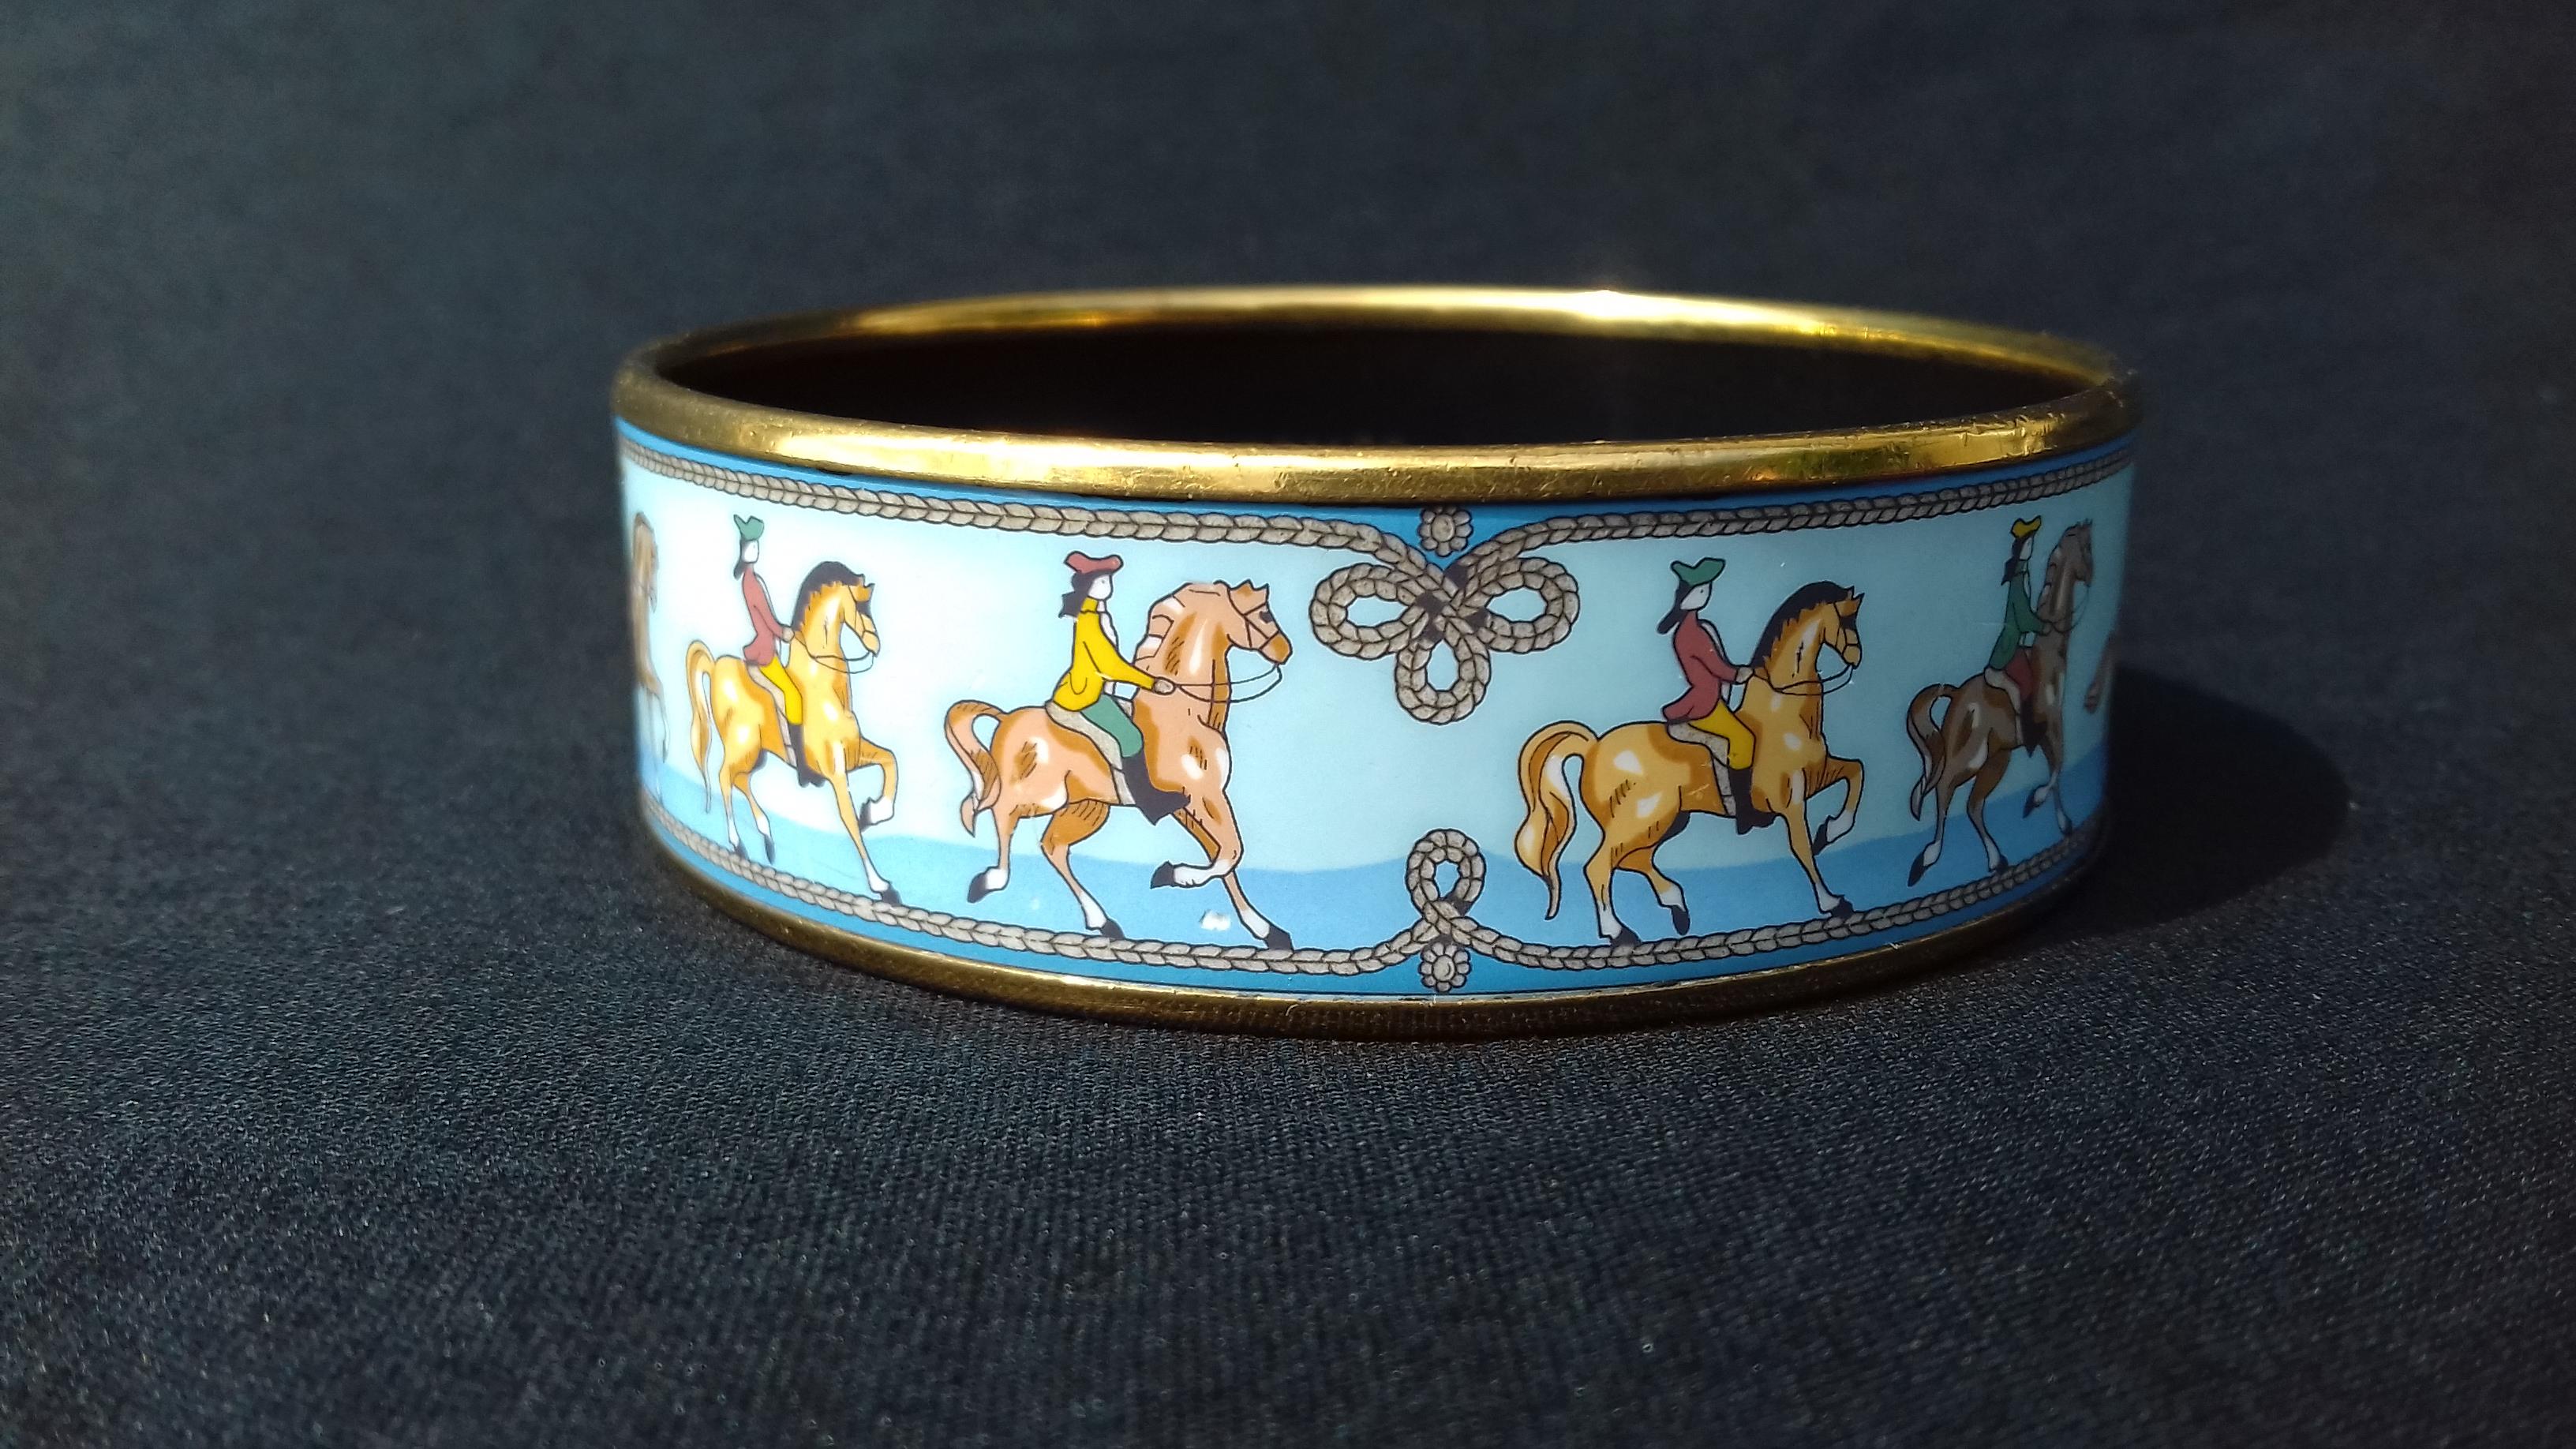 Beautiful Authentic Hermès Bracelet

Pattern: Horses

Made in Austria + E (2001)

Made of Printed Enamel and Gold Plated Hardware

Colorways: Light Blue background, Horses in shades of Beige, Caramel, Brown

